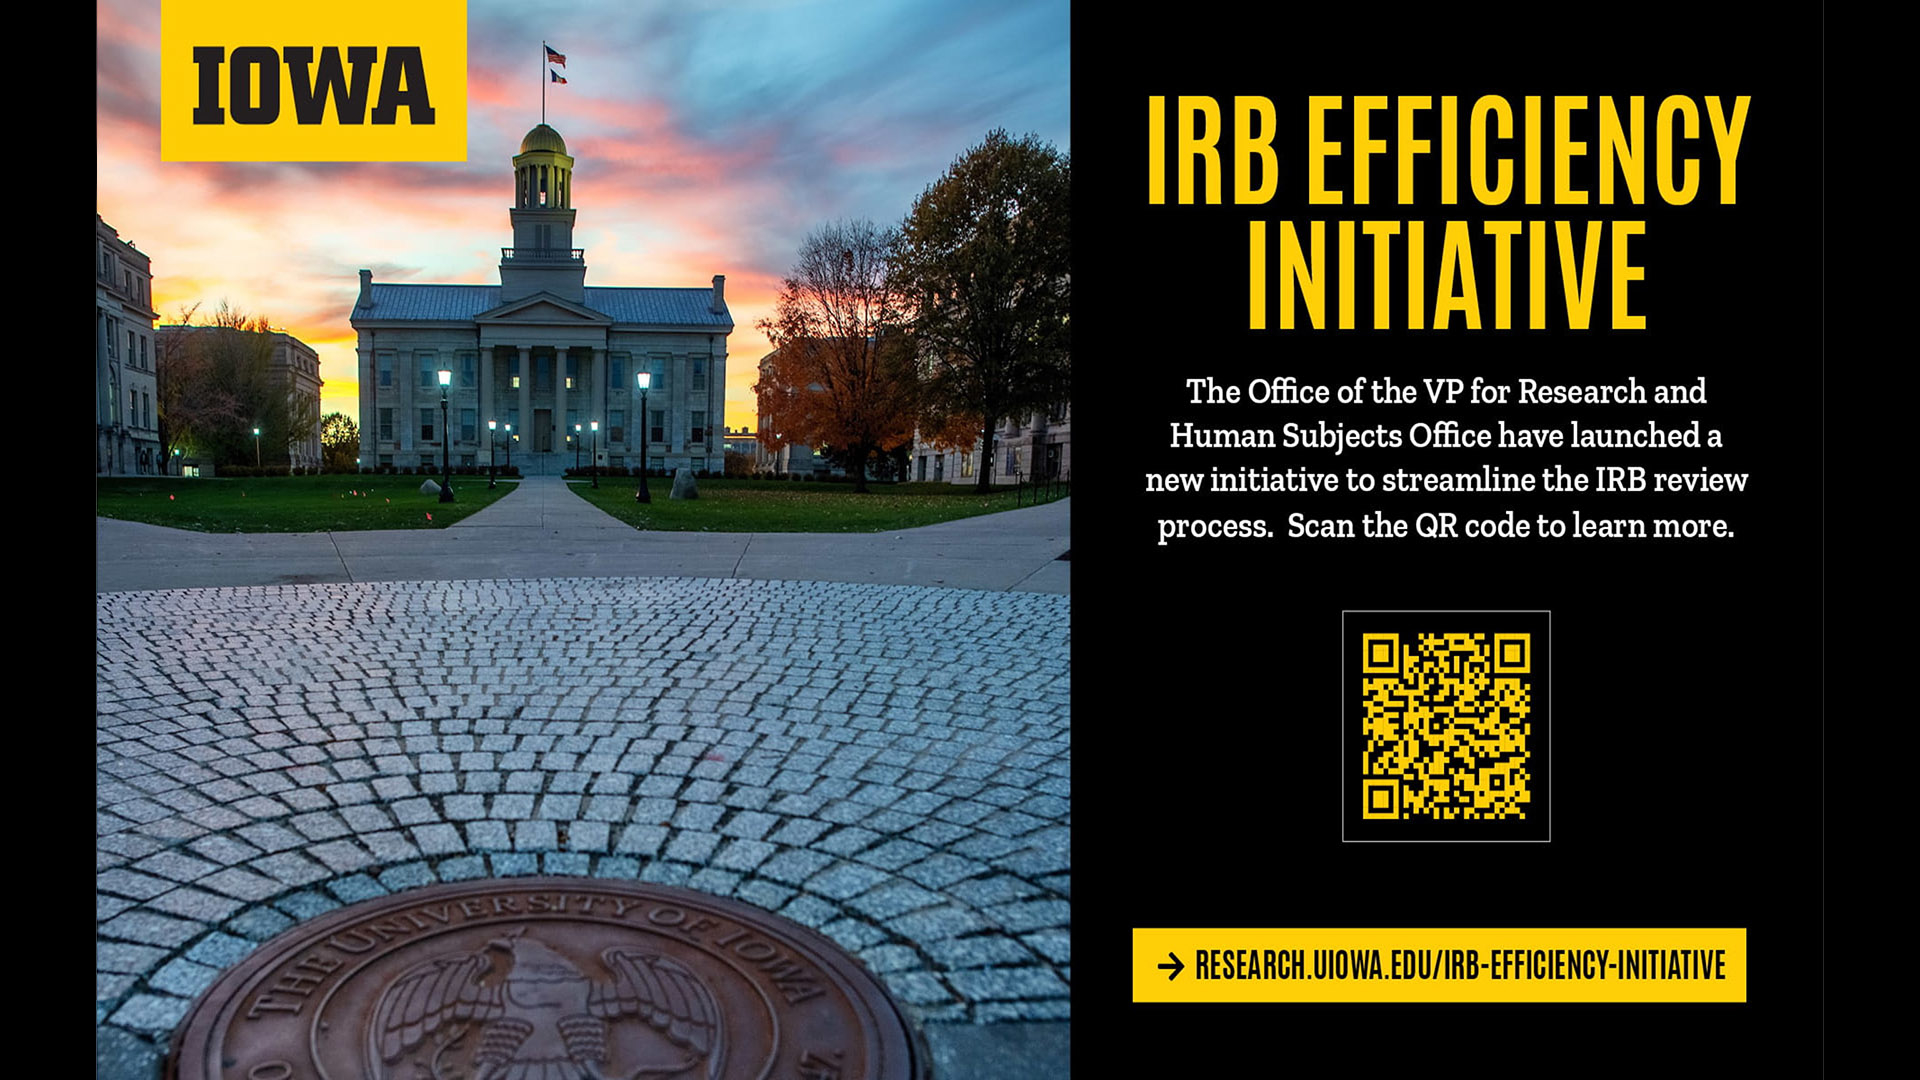 IRB Efficiency Initiative - contact the UI Office of the Vice President for Research for details.